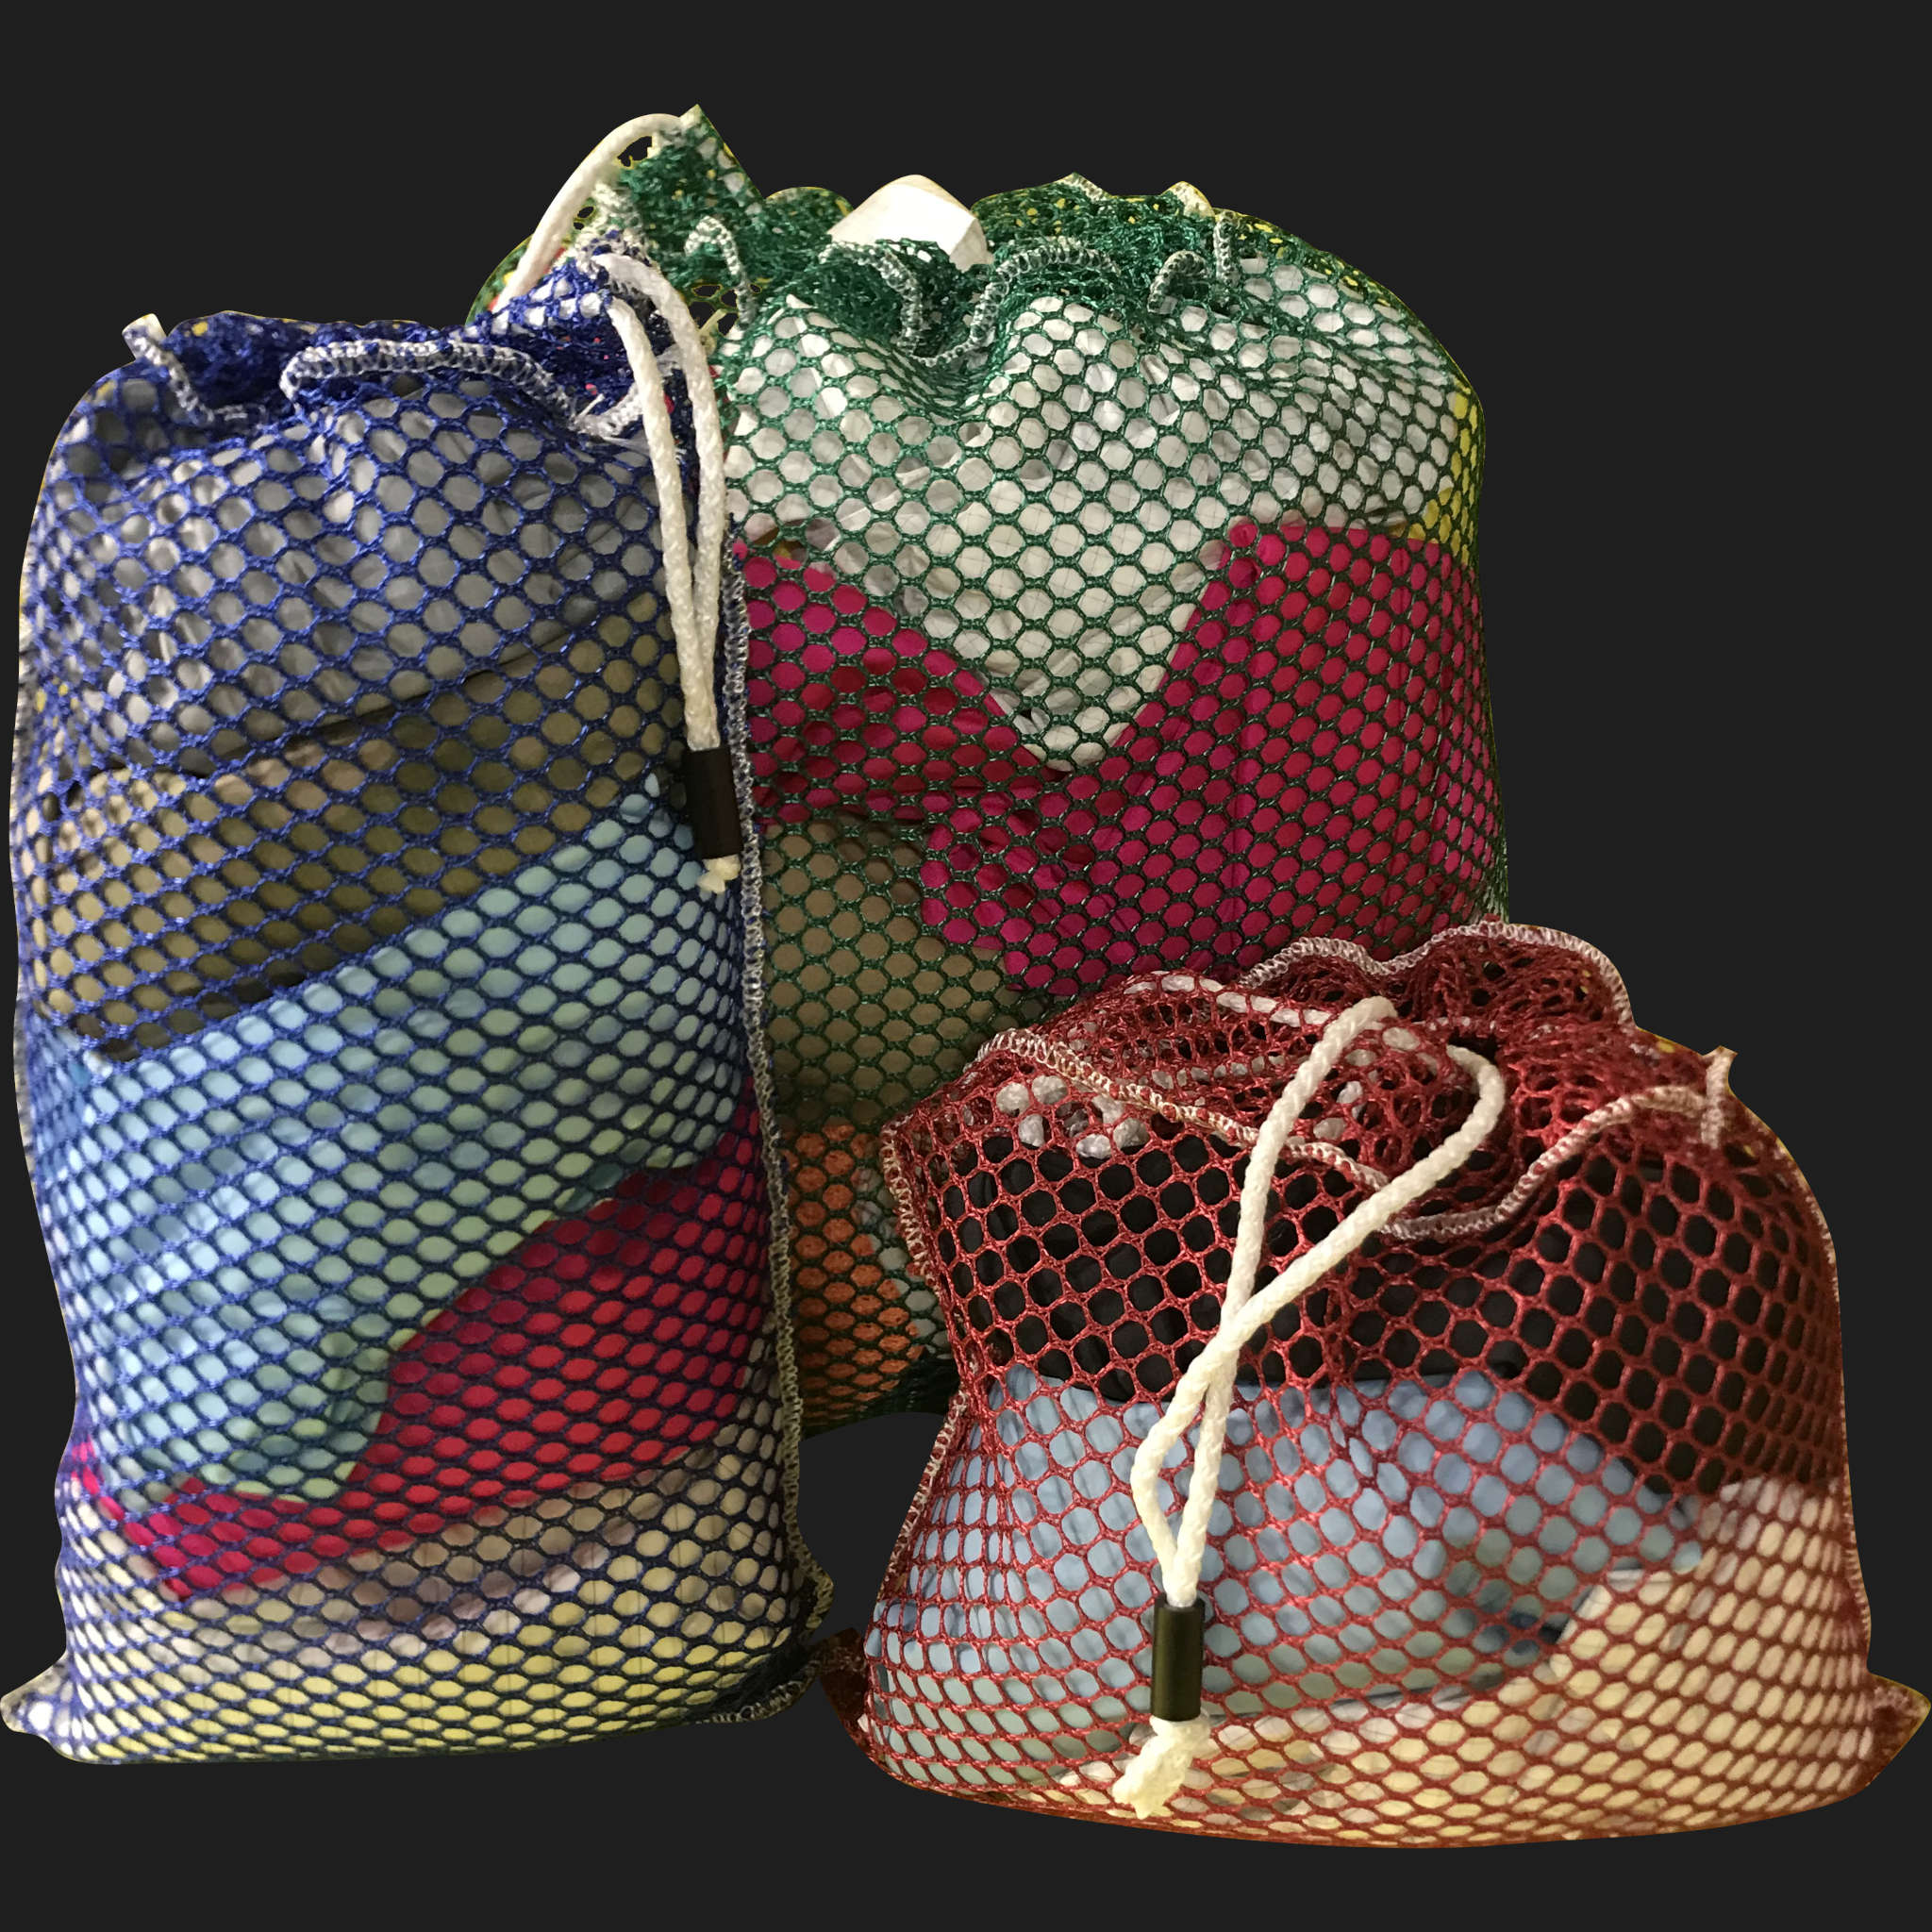 30" x 38" Customized Mesh-Net-Laundry Bags Heavy Duty with Cord and barrellock closure